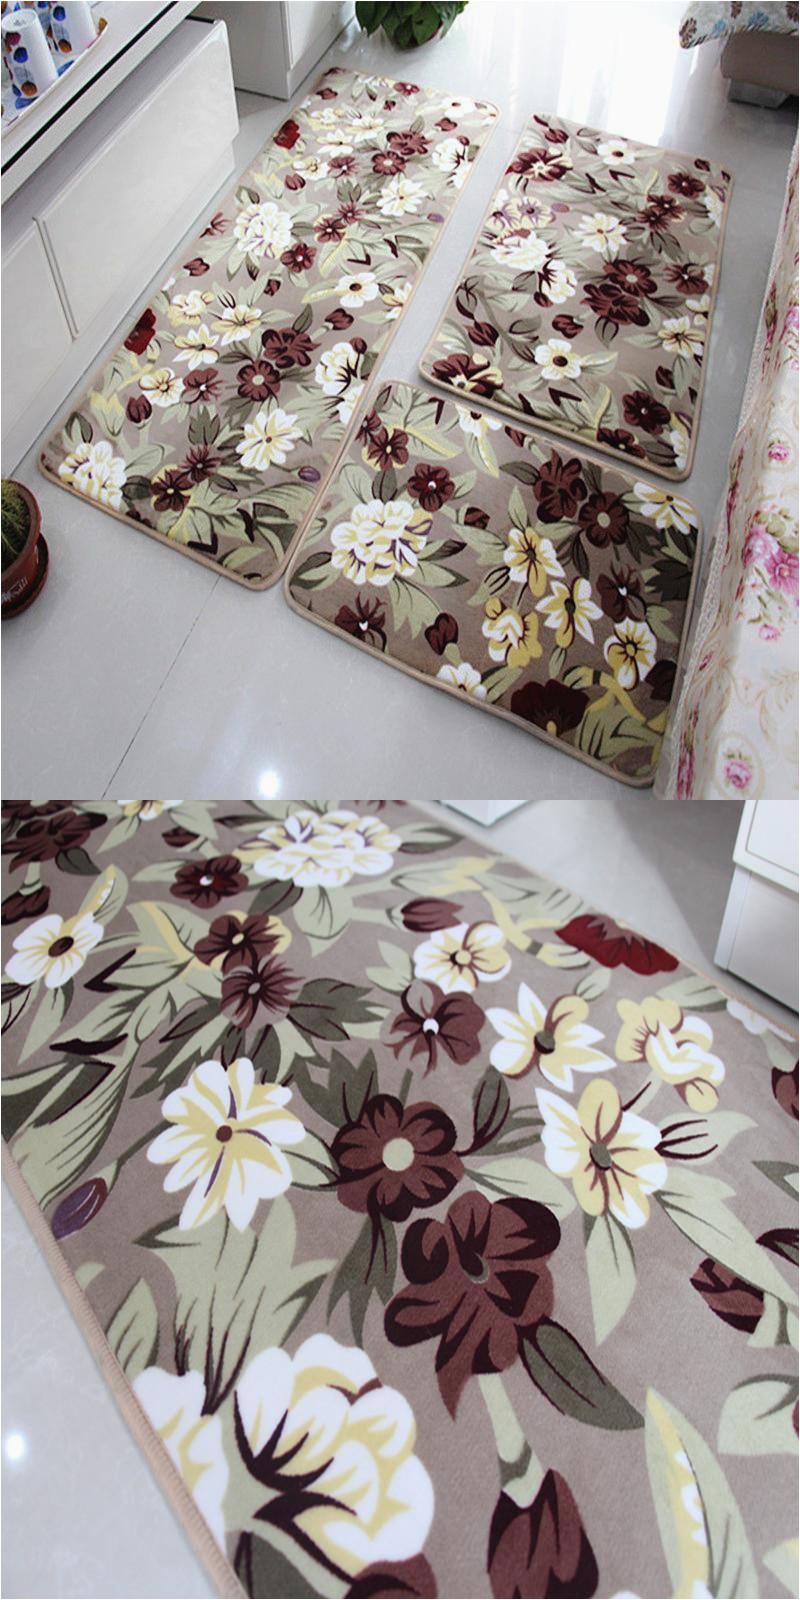 Bathroom Rugs Cut to Size Visit to Buy] 3 Pieces Set Size Bath Mat for the